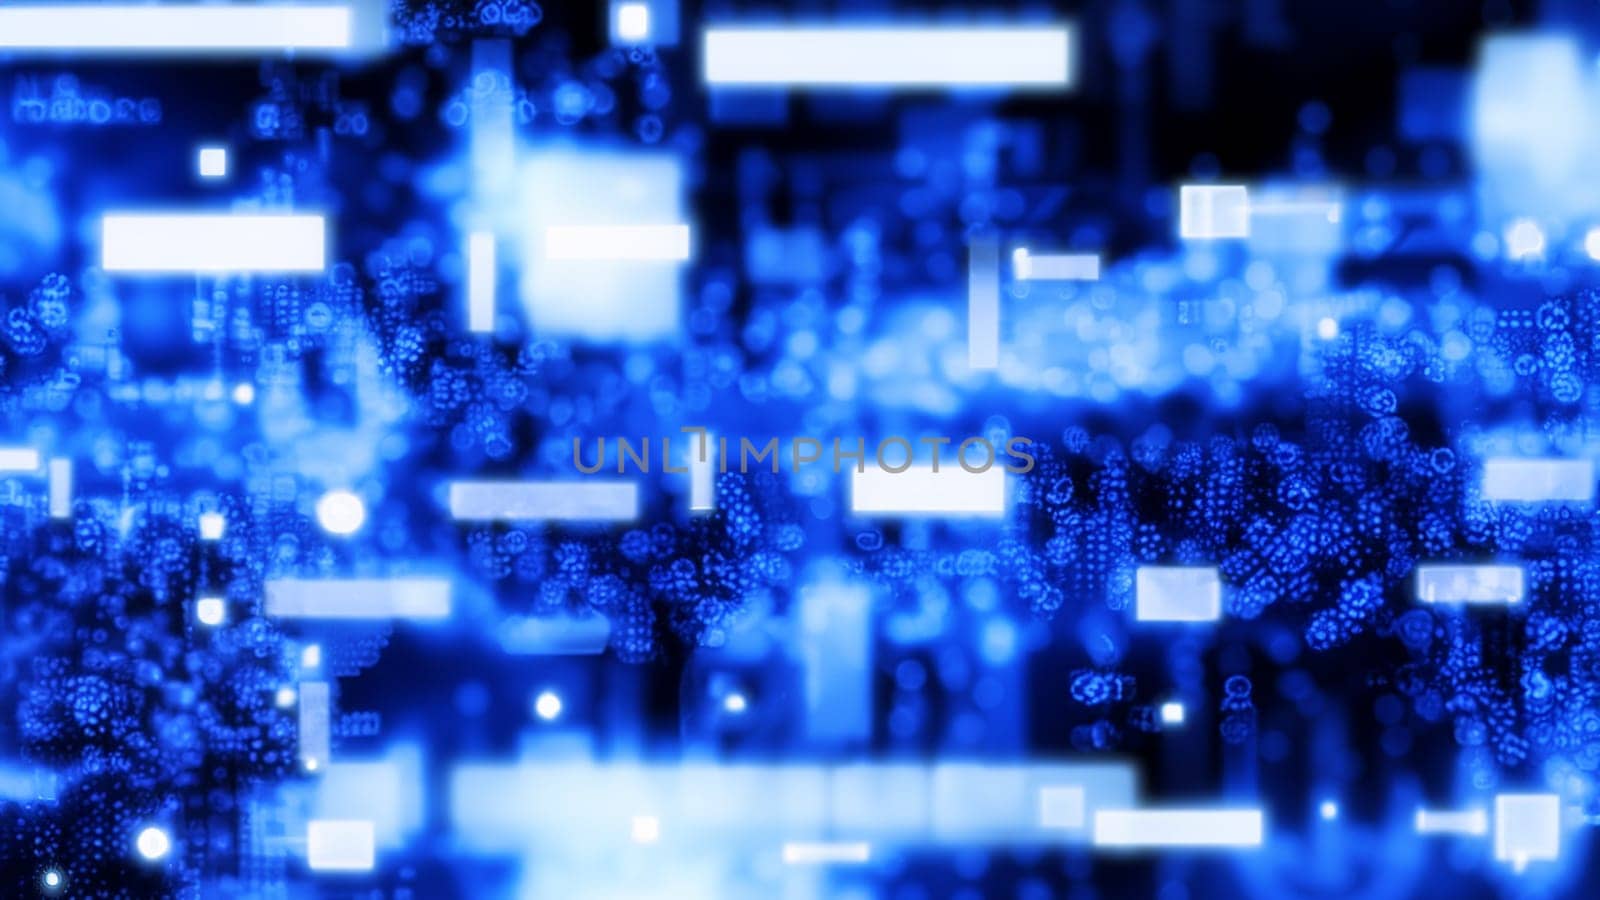 Abstract blue background with depth and blurred lights and flying digital elements in it, digital technology fintech